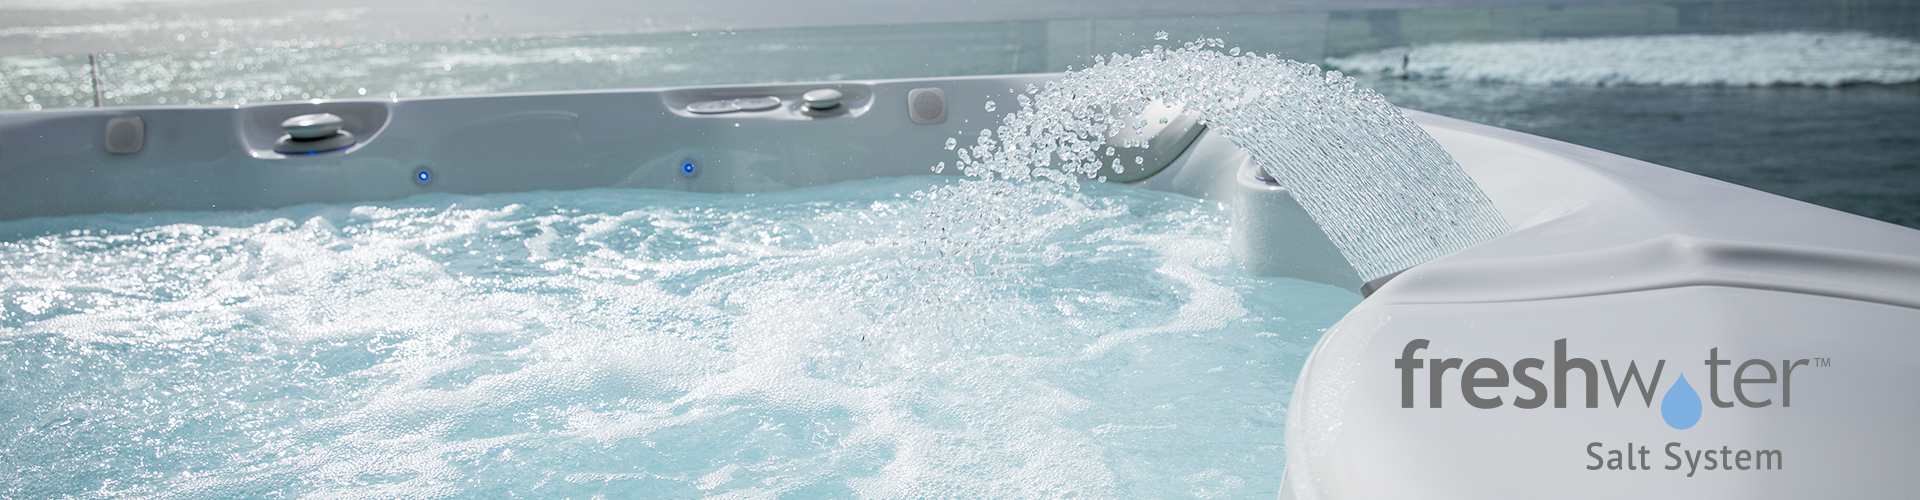 Is It Hard to Keep A Hot Tub Clean And Safe?